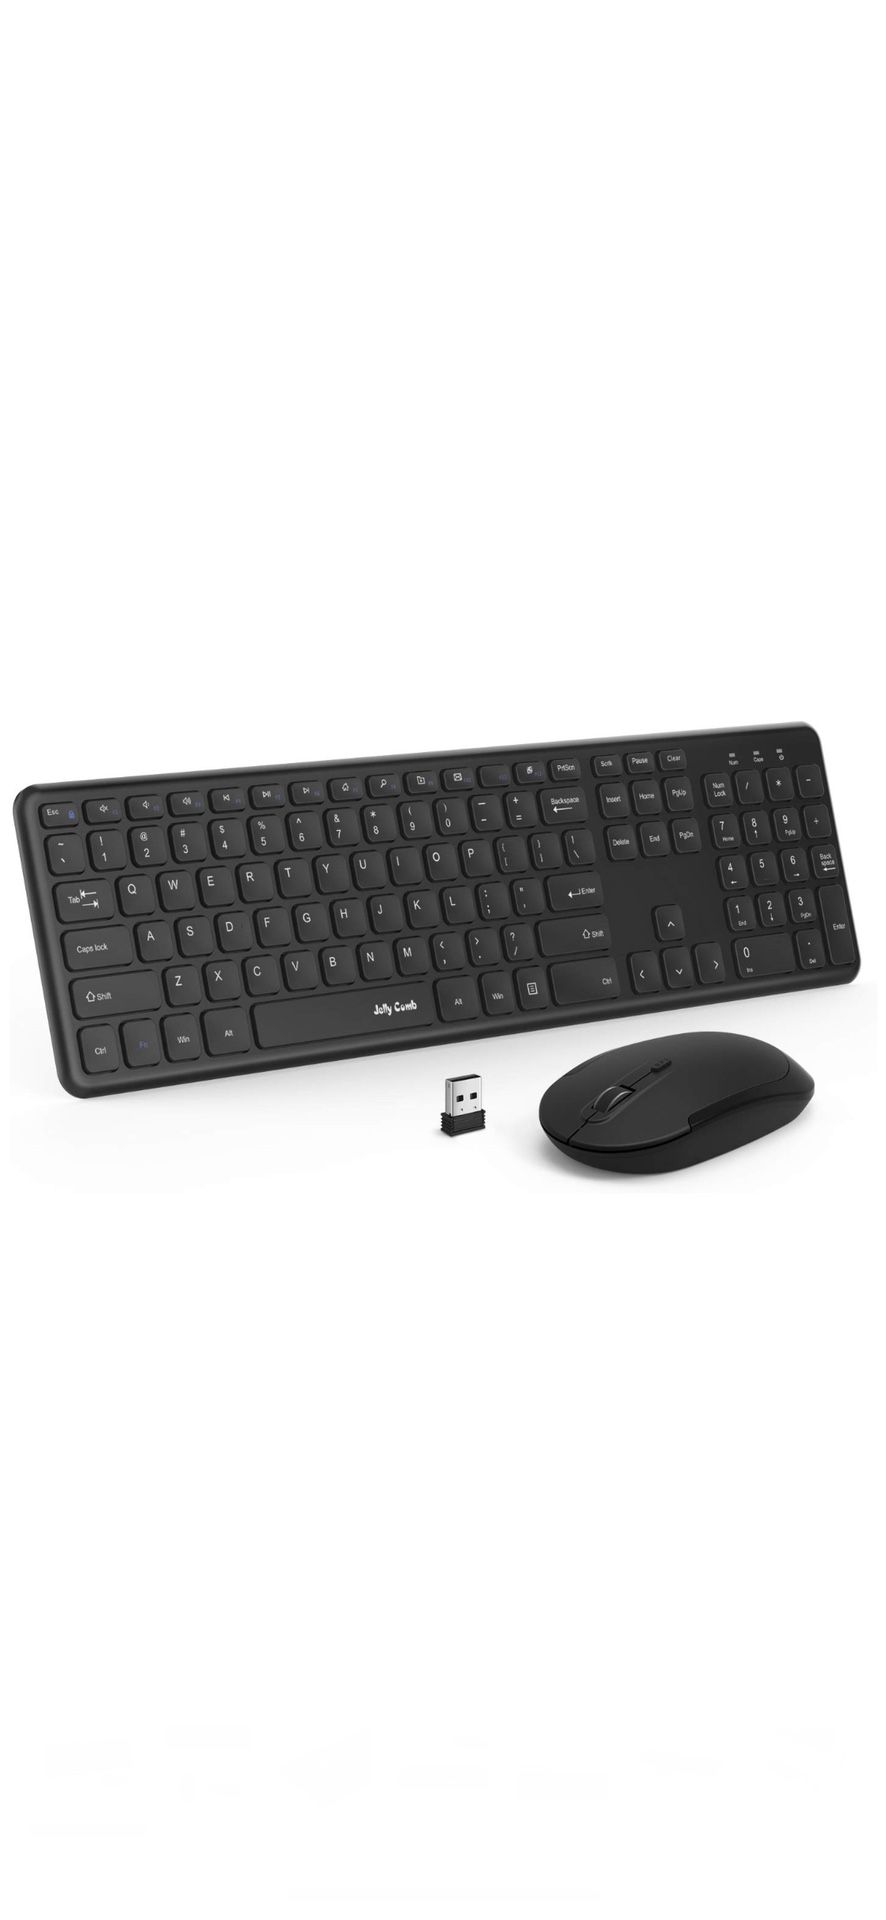 Jelly Comb 2.4GHz Ultra Thin Full Size Wireless Keyboard Mouse Combo Set with Number Pad for Computer, Laptop, PC, Desktop, Notebook-(Black)